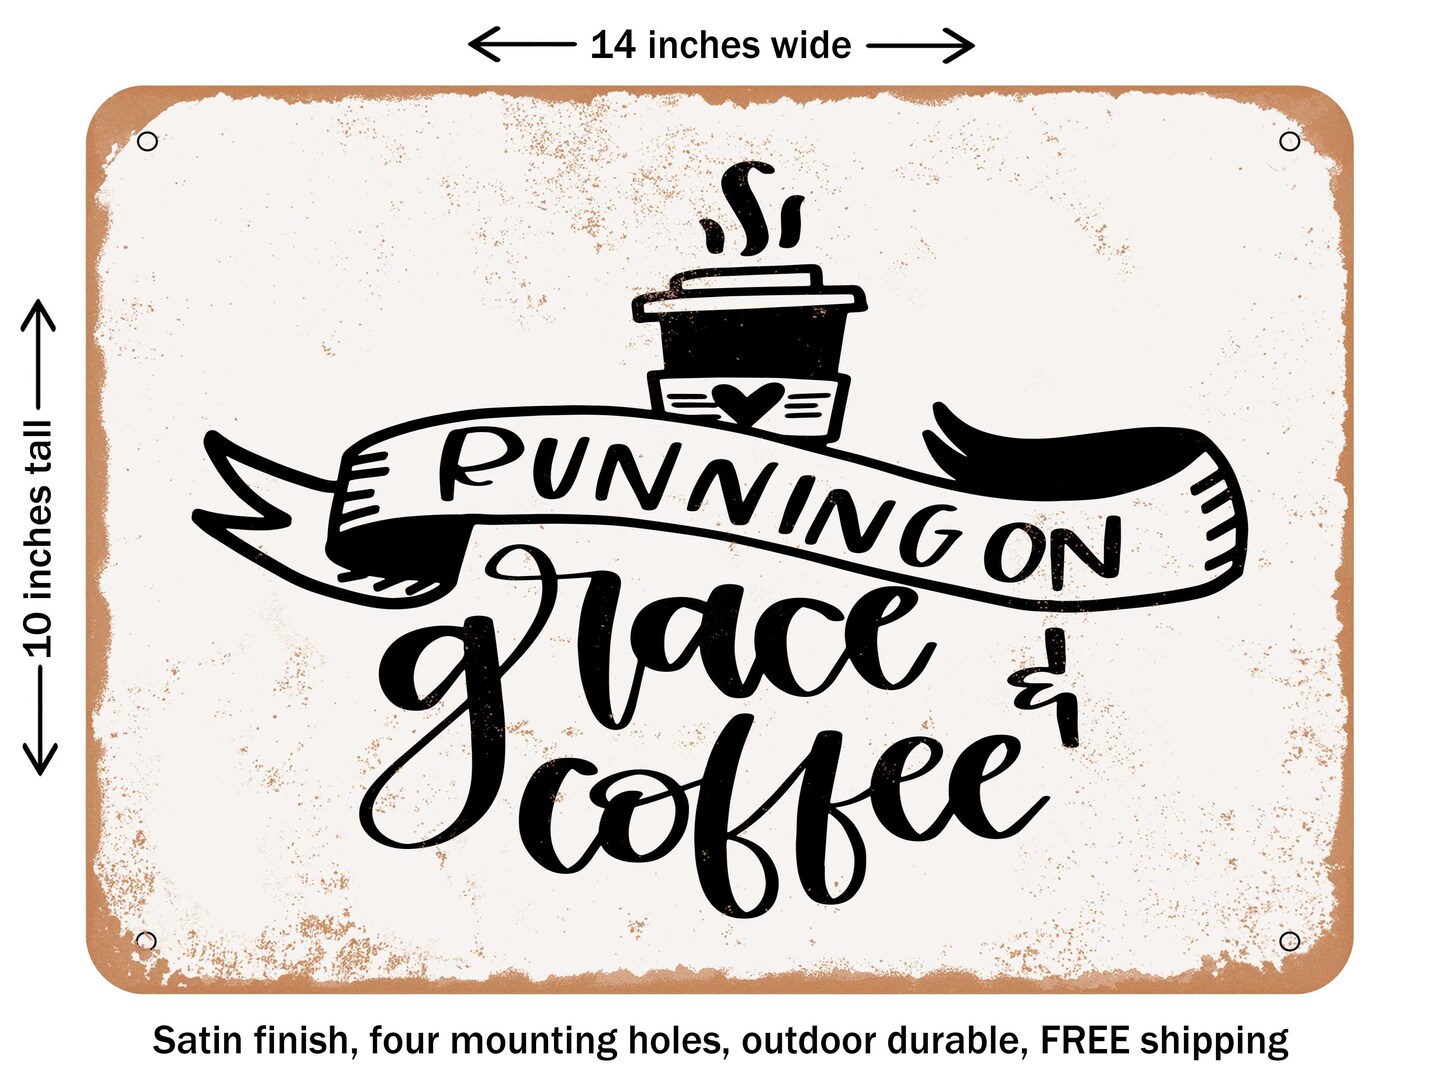 DECORATIVE METAL SIGN - Running On Grace and Coffee - Vintage Rusty Look